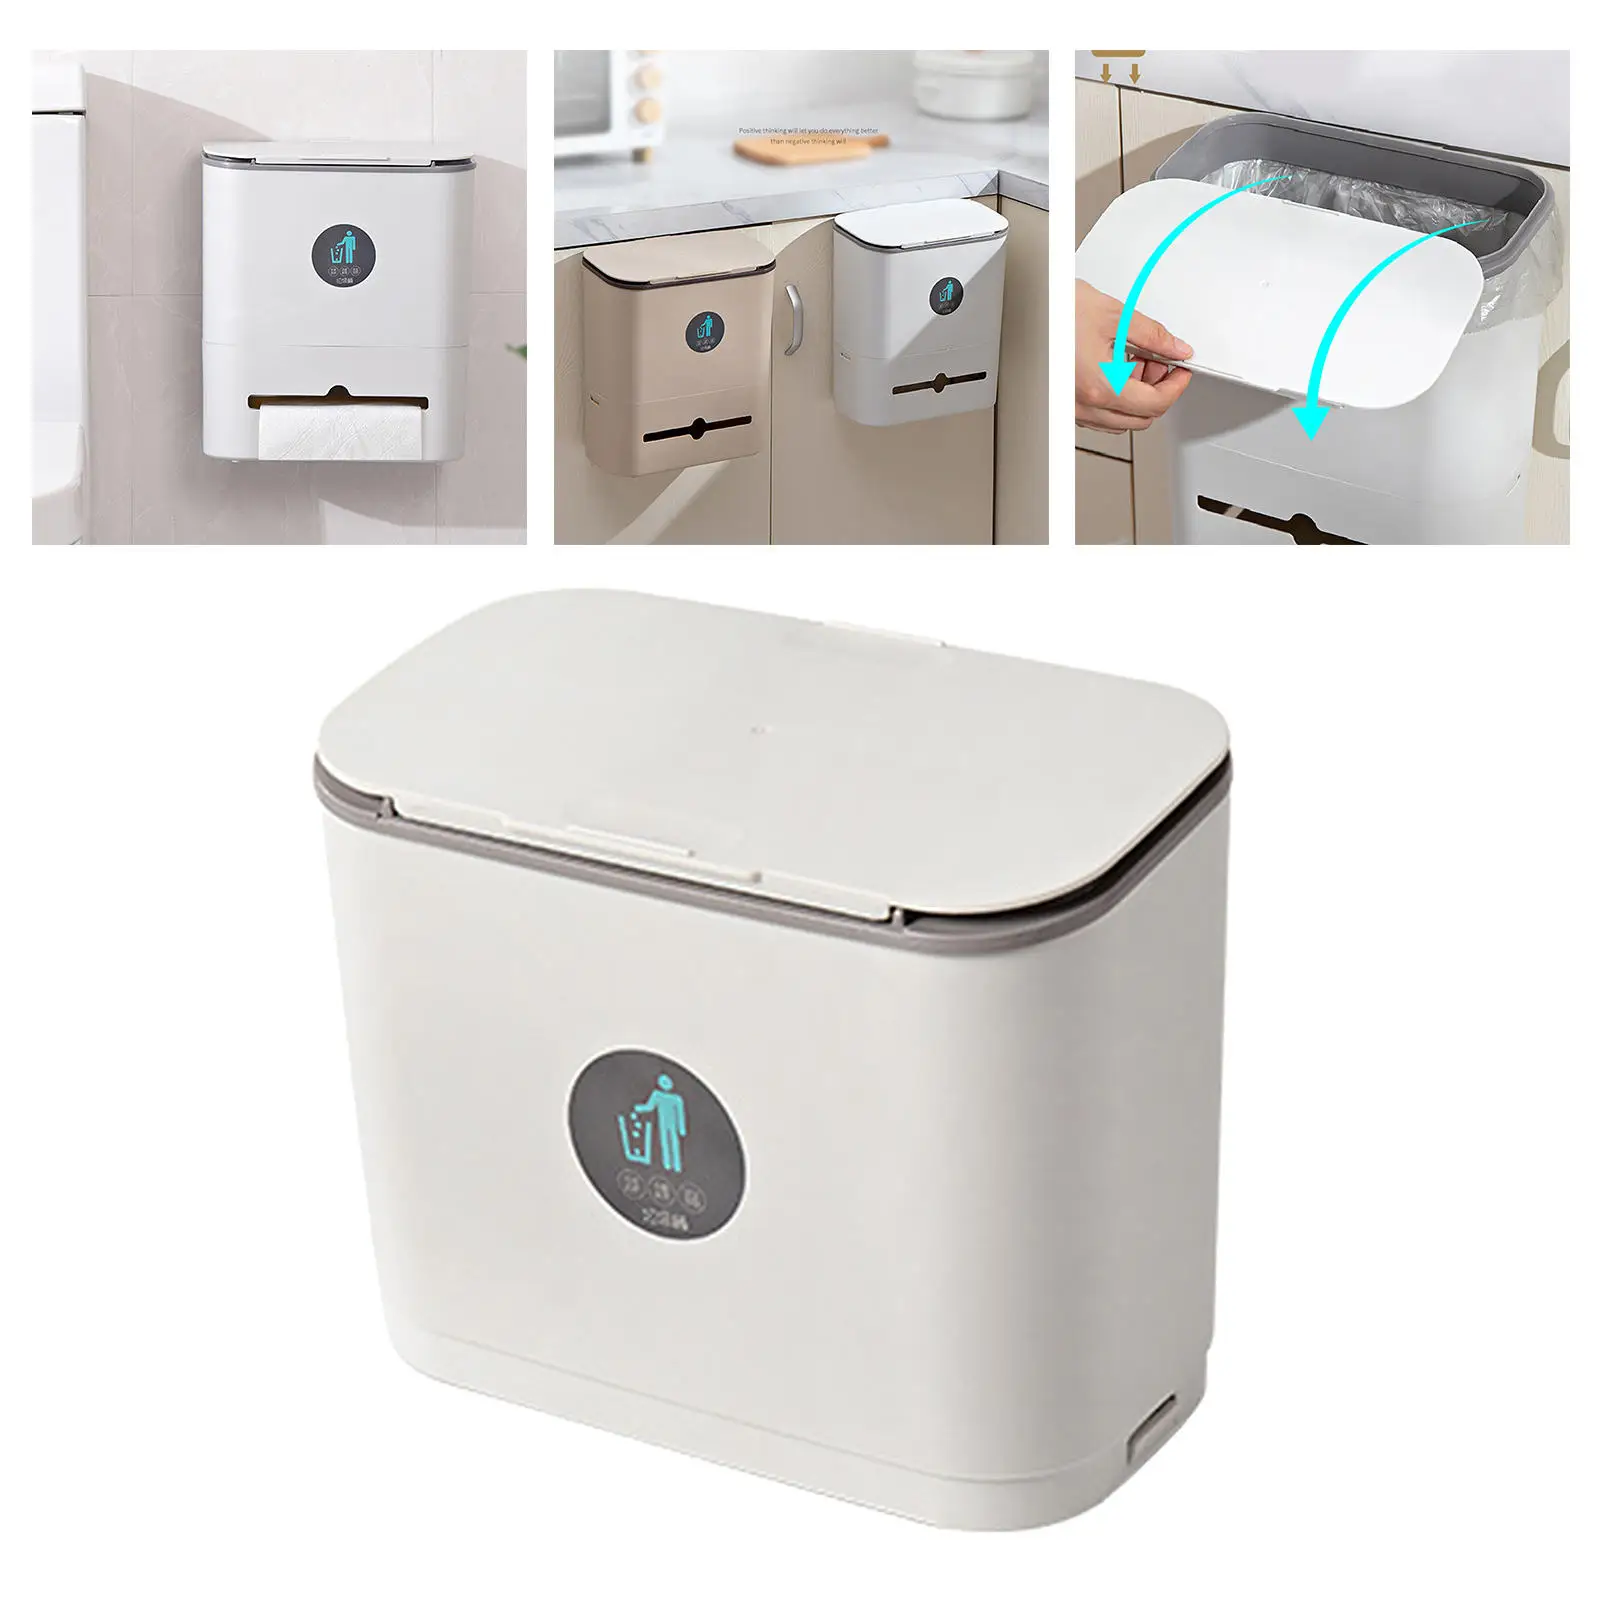 Wall Mounted Hanging Trash Can with Lid Installable Counter Top under Sink Compost Wastebasket Cupboard Bathroom